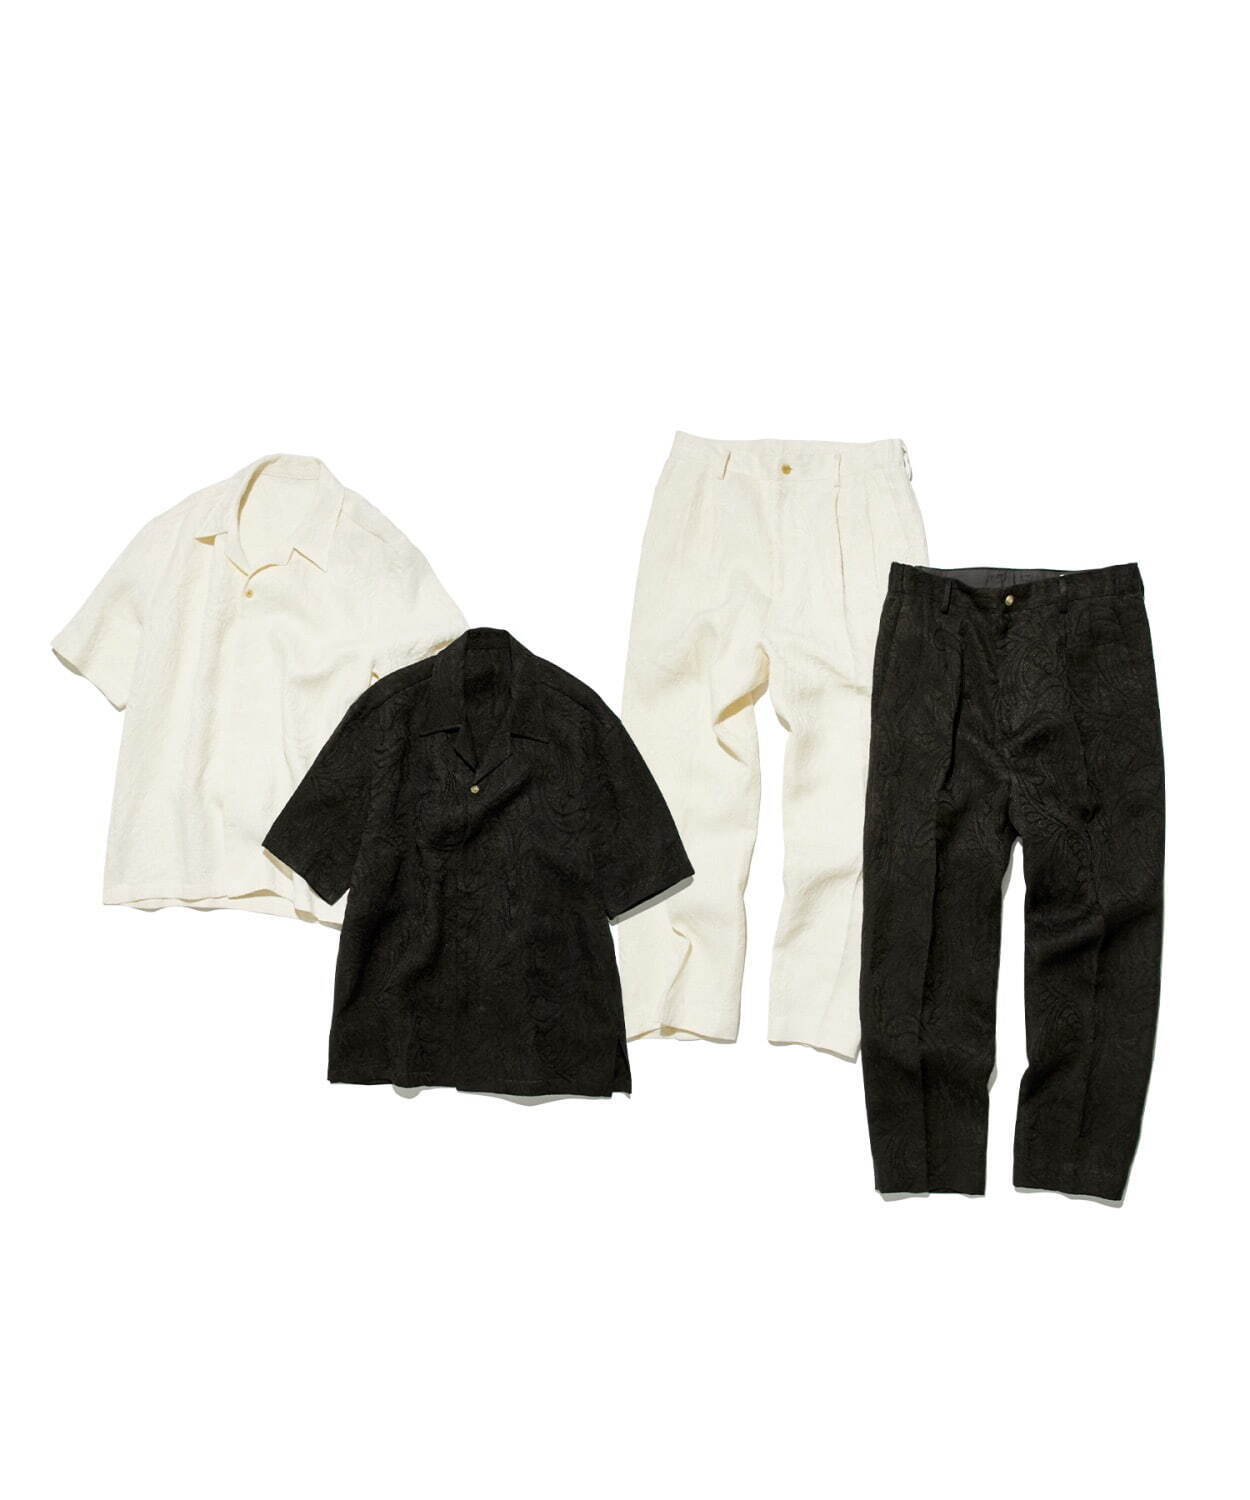 EX. OPEN COLLAR SHORT-SLEEVED SHIRT 各46,200円、
EX.TWO TUCKS TAPERED PANTS 各52,800円